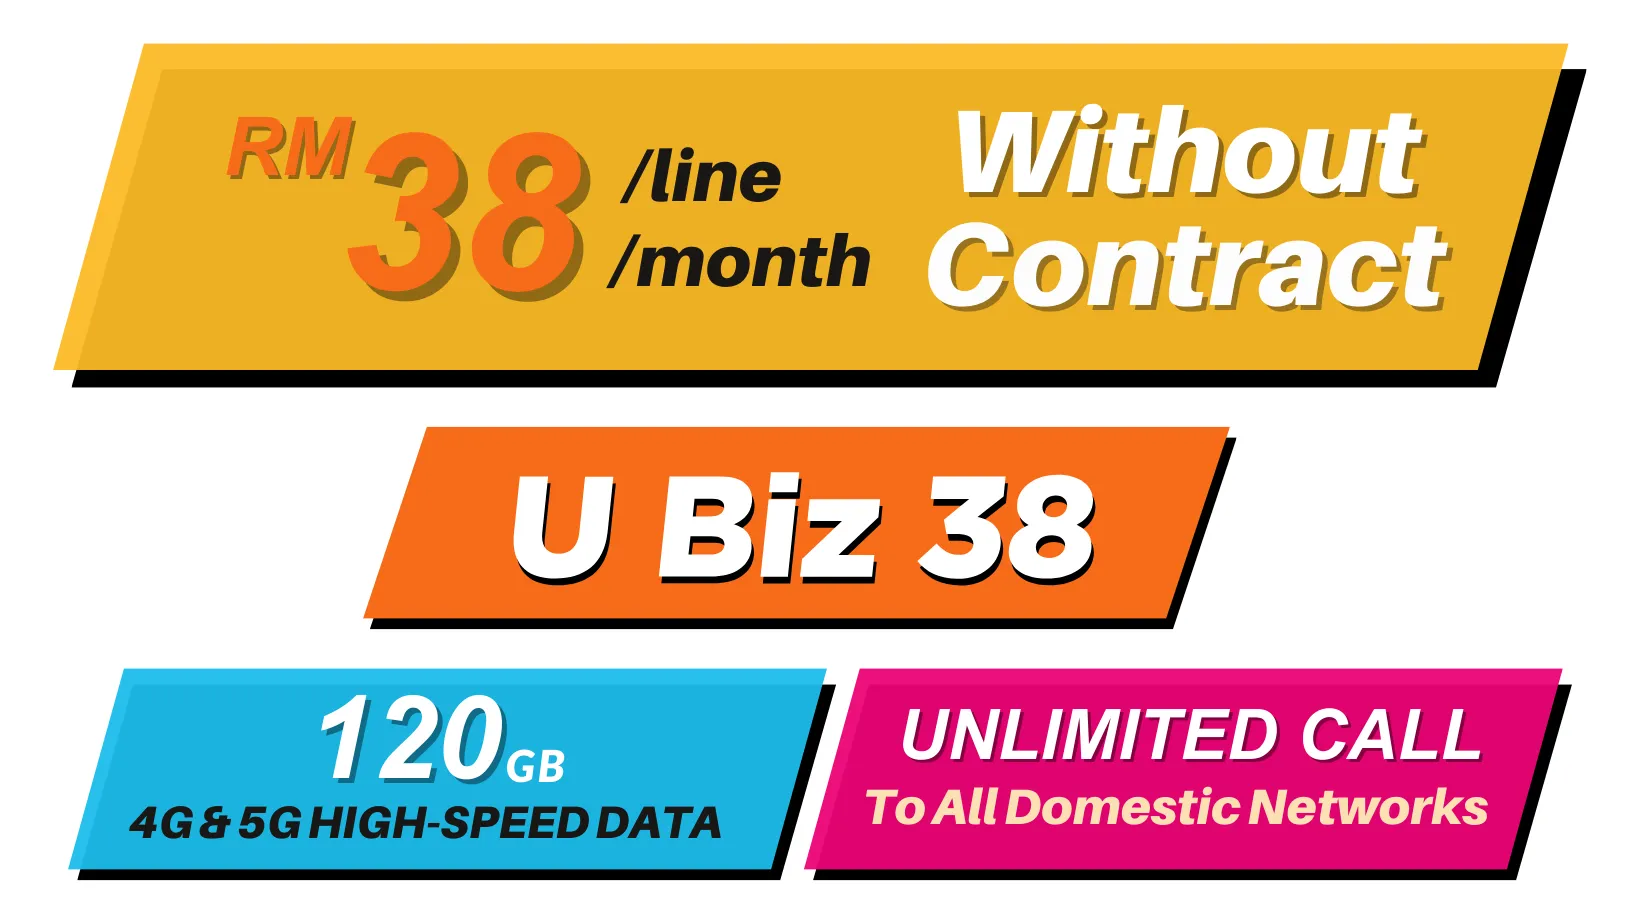 U Mobile Postpaid 38 without contract plan